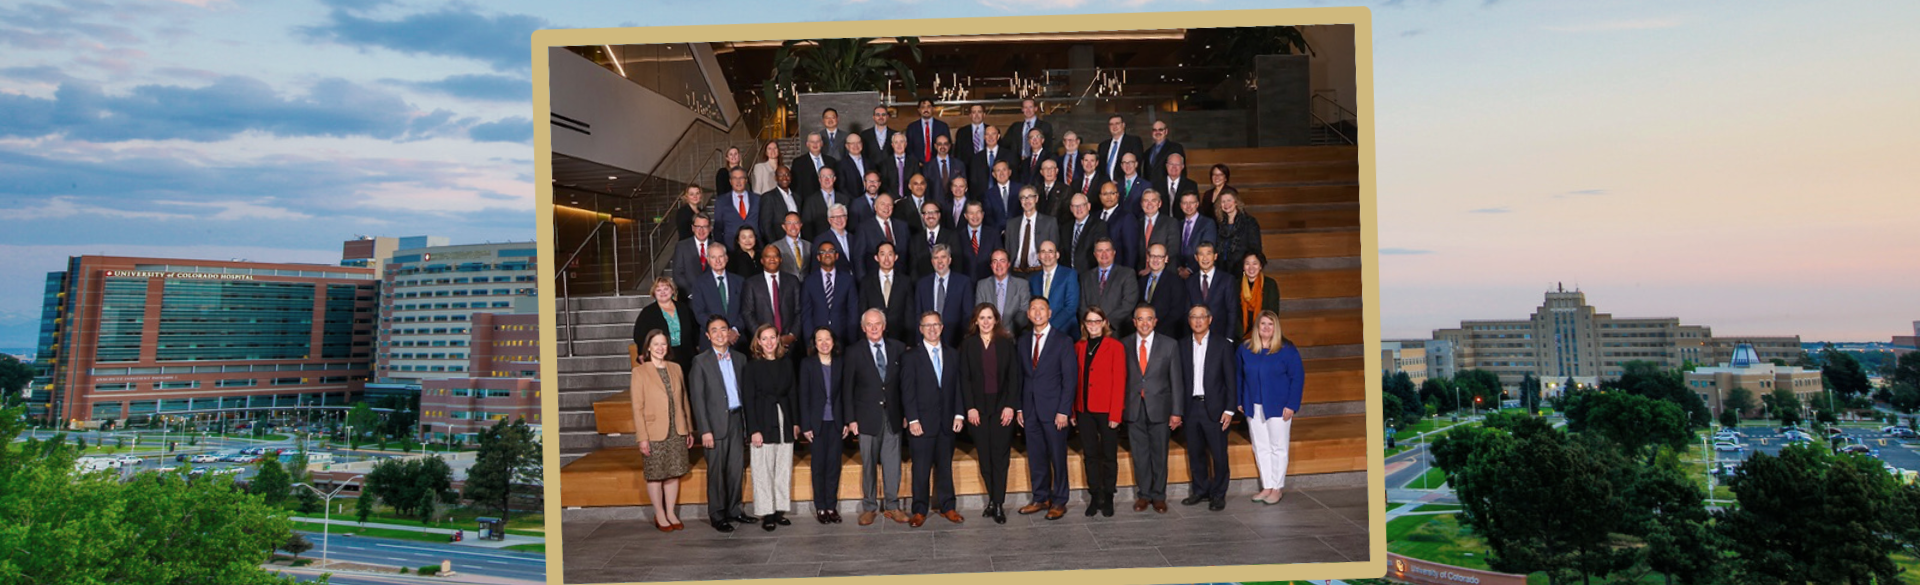 Attendees of the Society of Clinical Surgery Annual Scientific Meeting